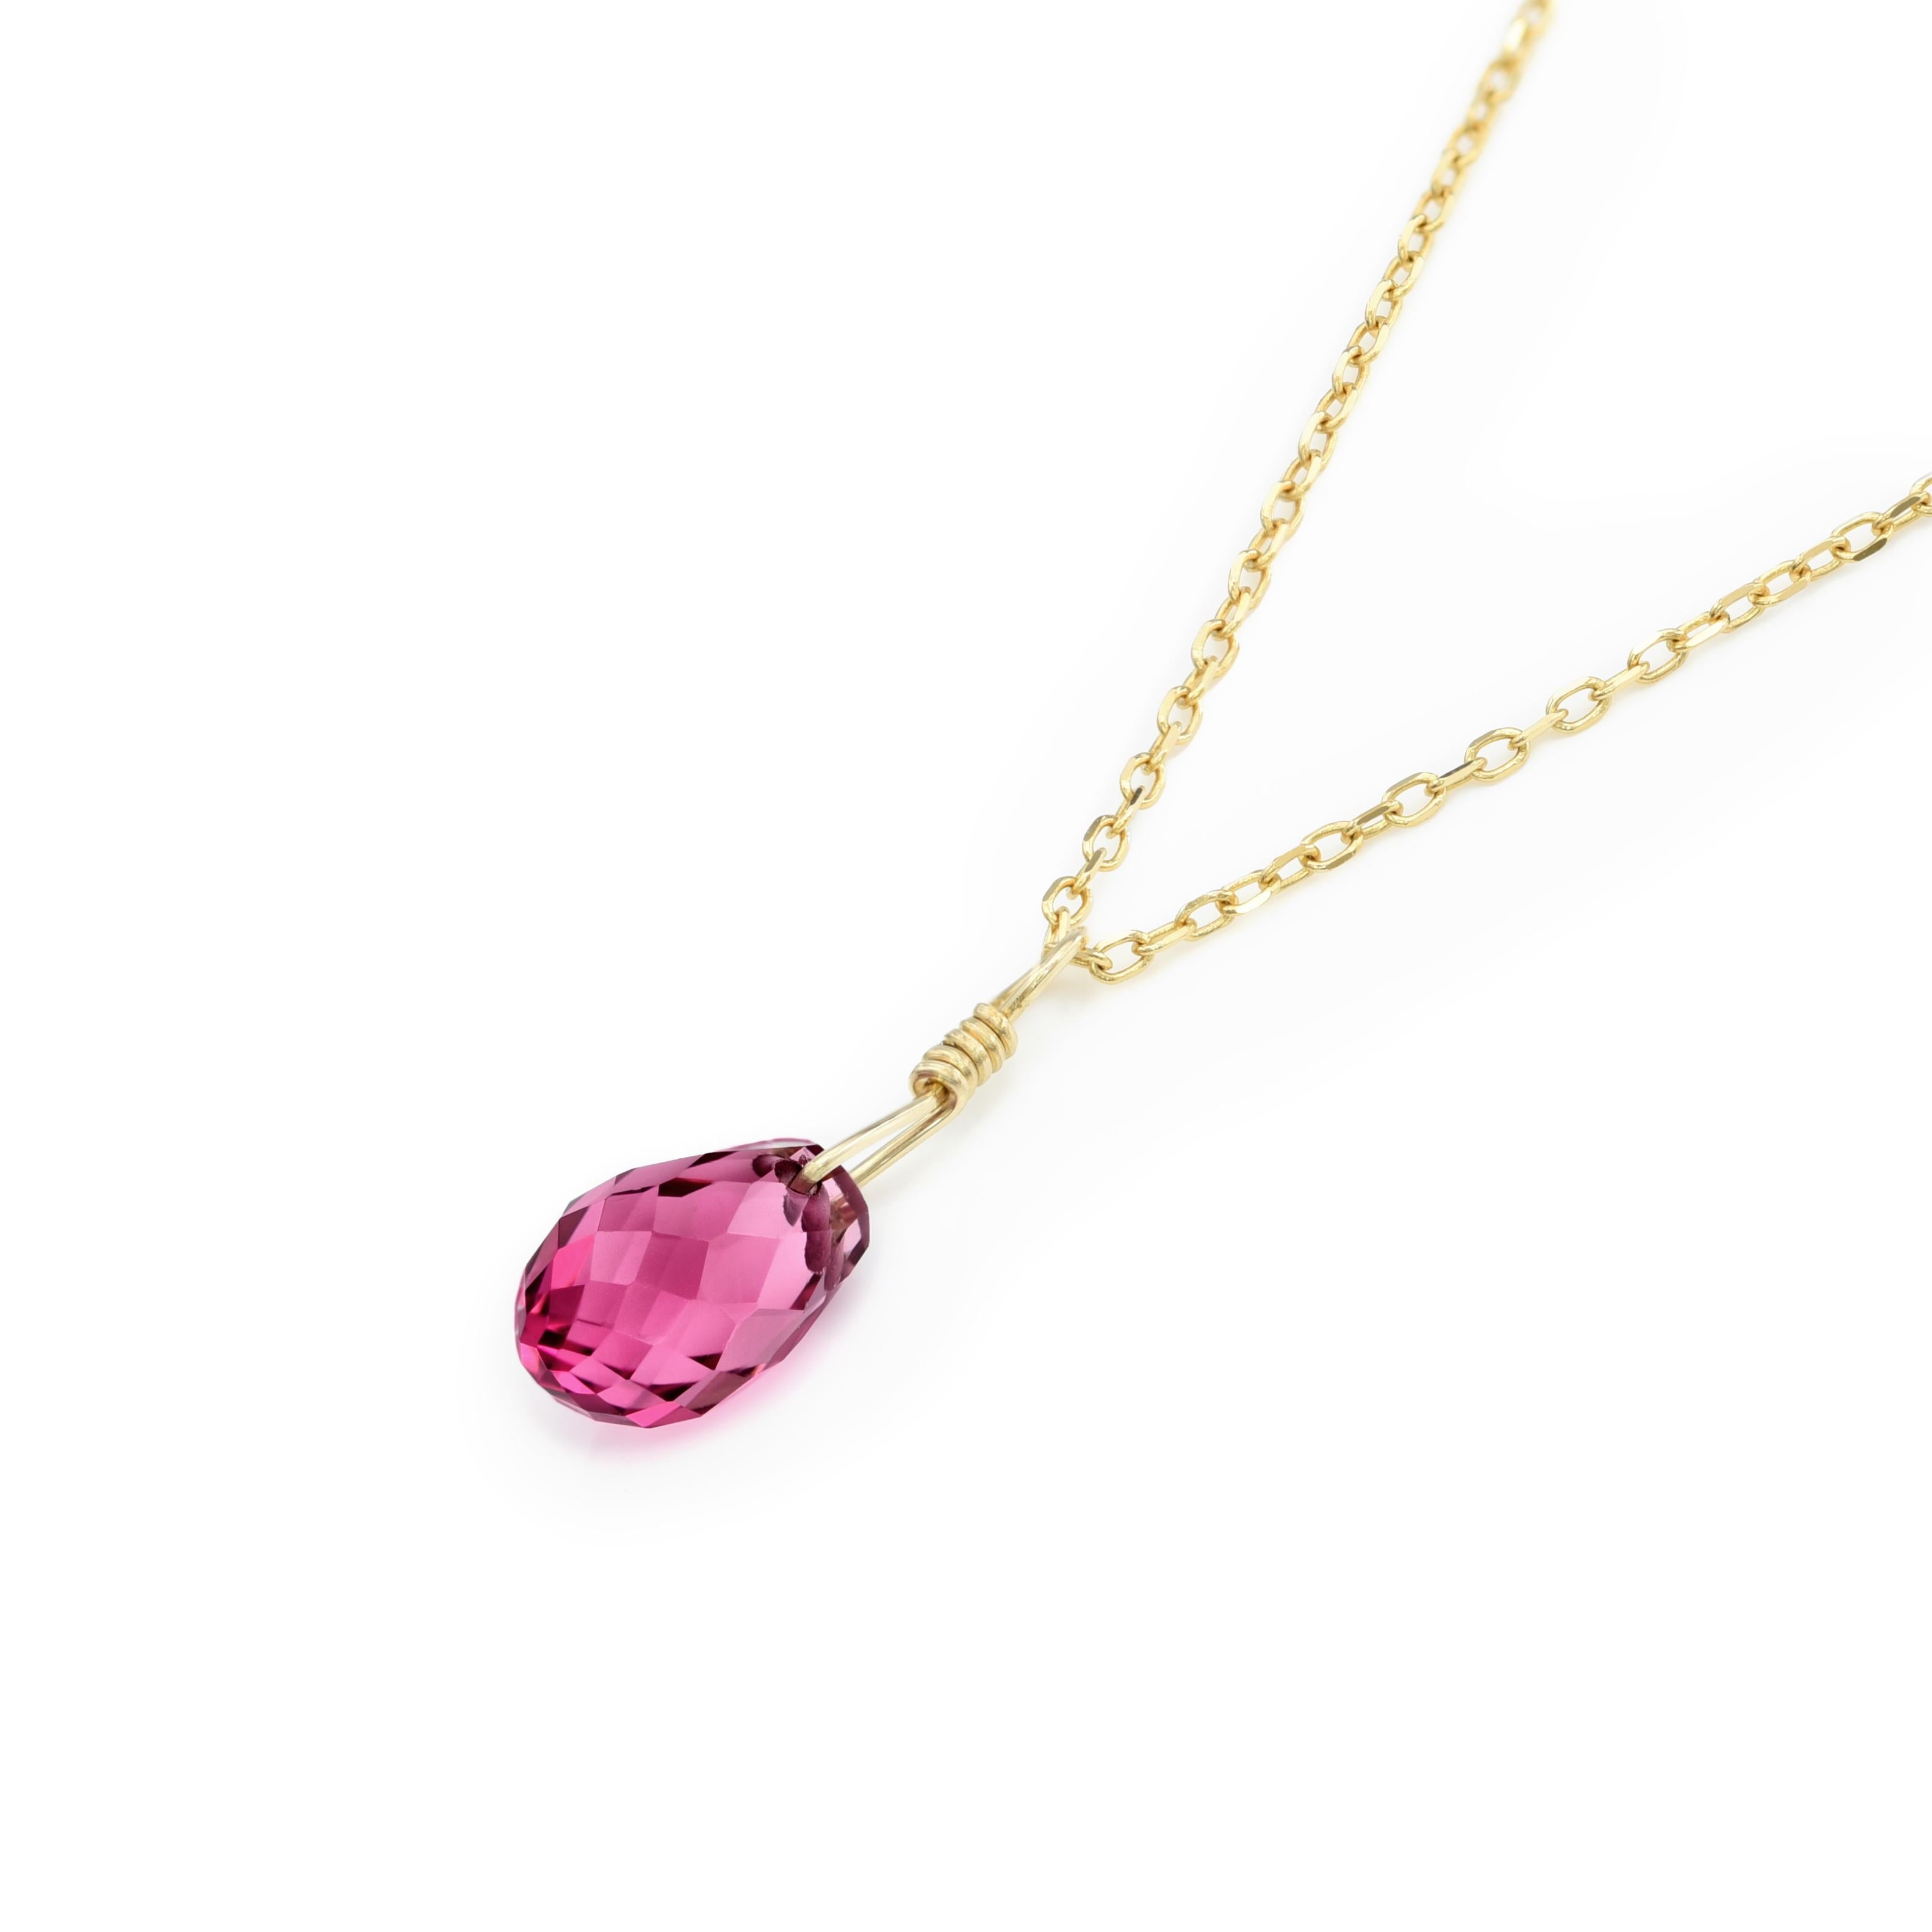 Elevate your elegance with the Pink Tourmaline Pendant. Embellished with 1.98 carats briolette shaped gem from Brazil, it graces a 14K Yellow Gold setting with an 18 inches Spring Chain. Measuring 8 x 5.2 mm, its radiant presence shines. The gem's